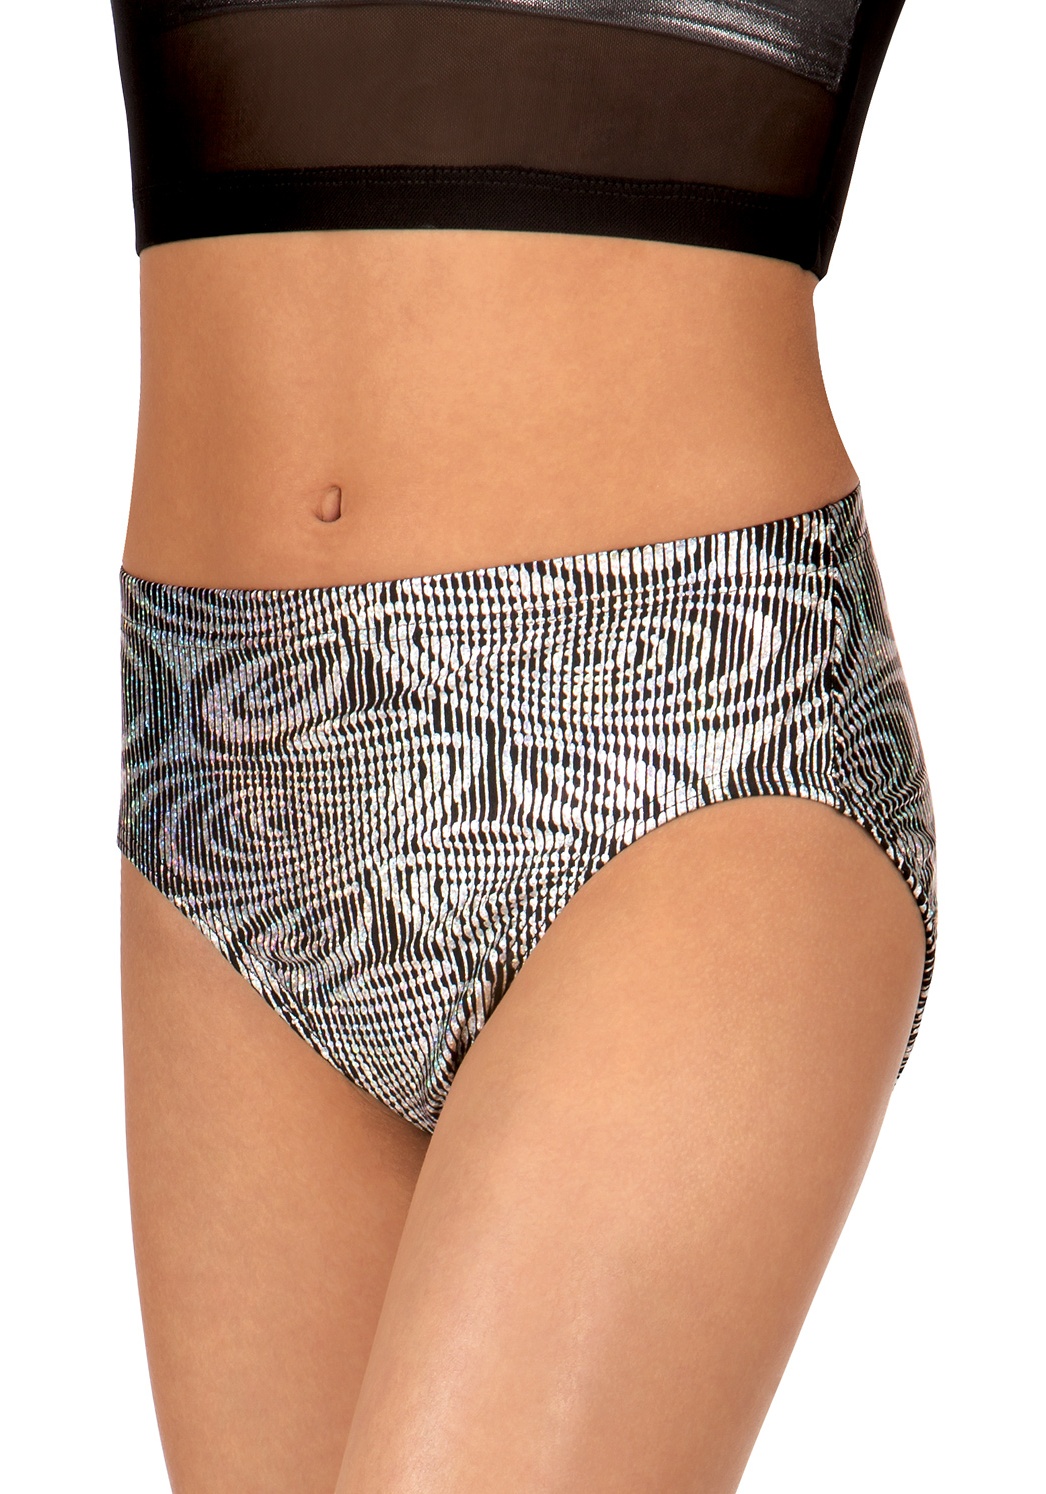 BWP089 Body Wrappers Child Jazz Cut Dance Briefs